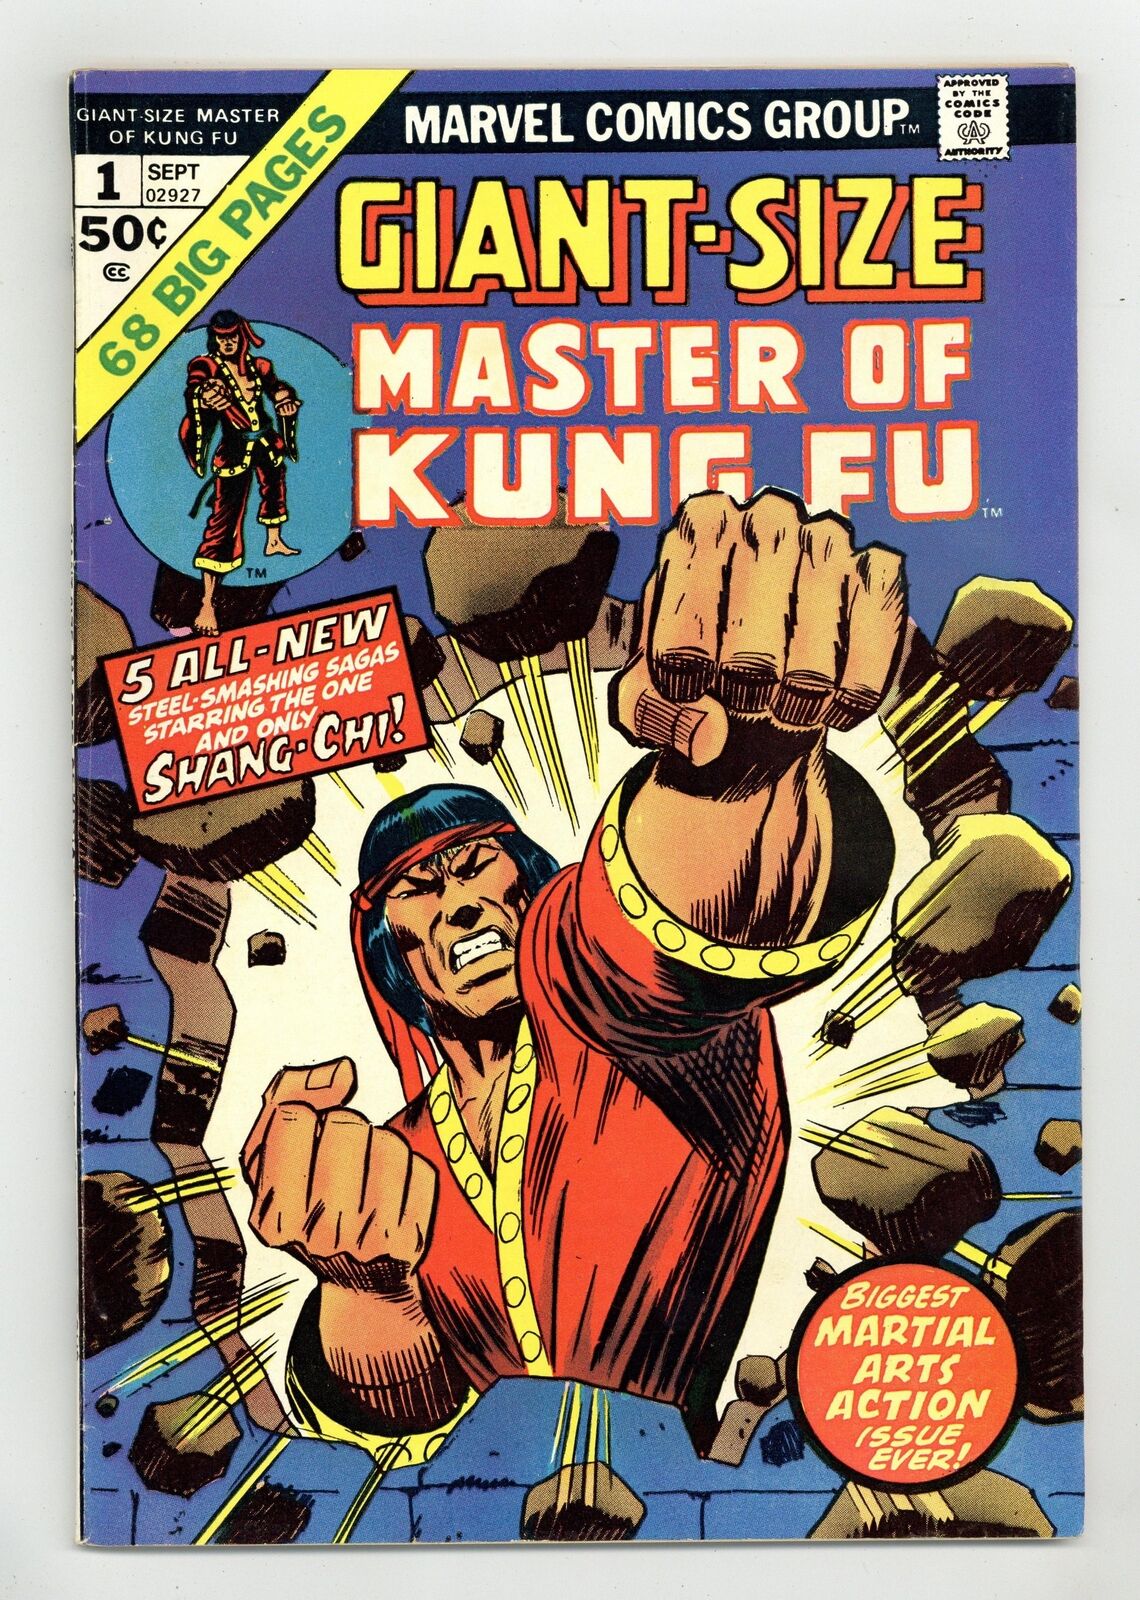 Giant Size Master of Kung Fu #1 FN+ 6.5 1974